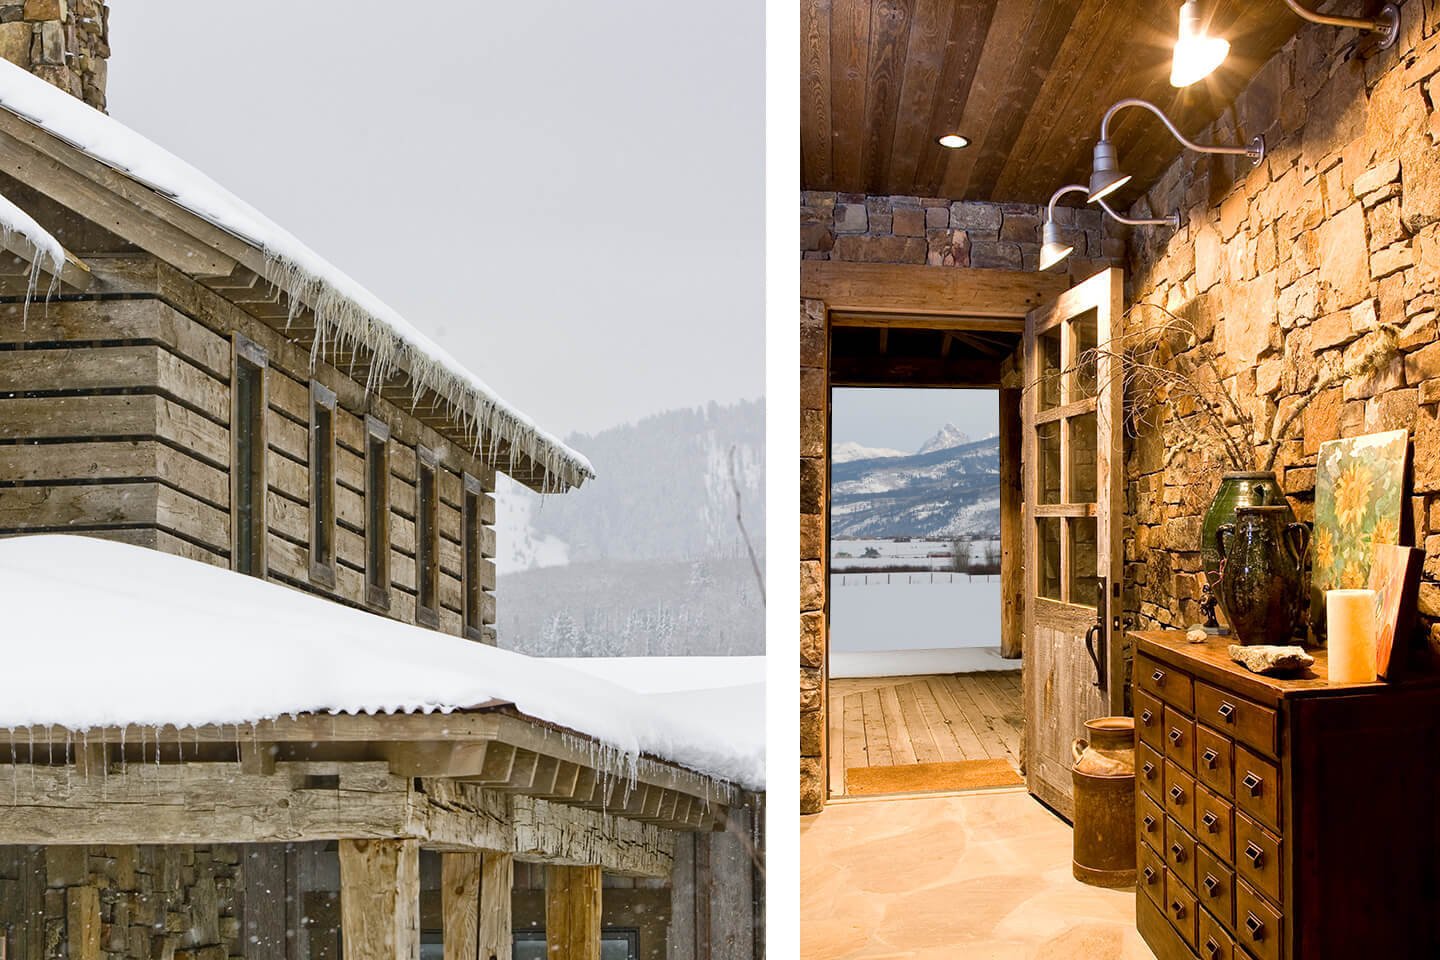 Architecture in winter and stone entryway